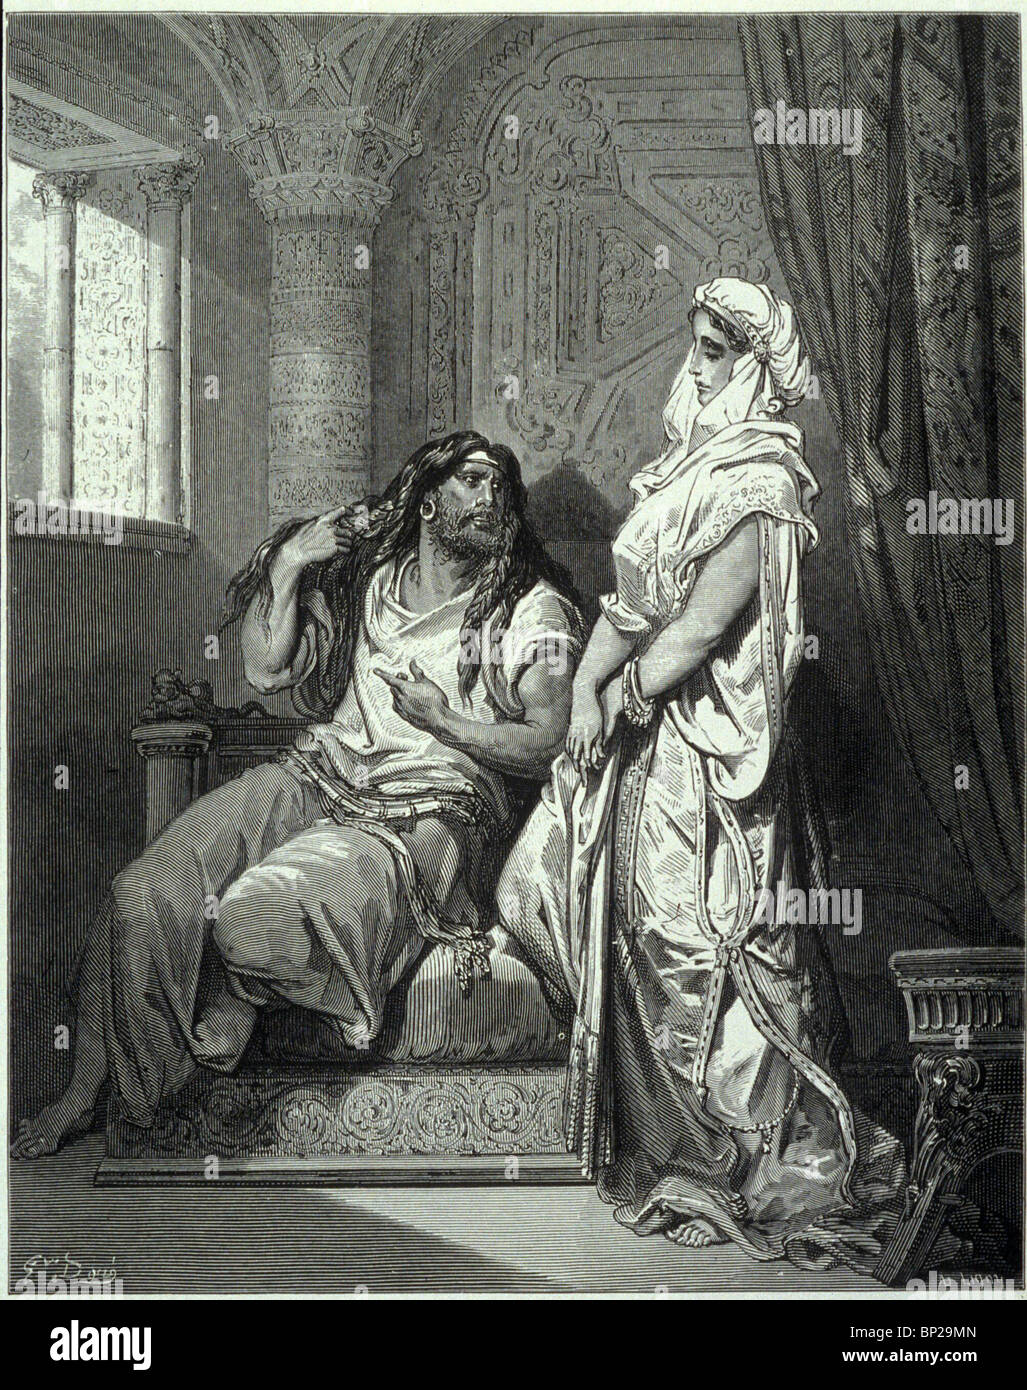 3166. SAMSON AND DALILA ILLUSTRATION FROM THE DORE' BIBLE' PUBLISHED IN 1866, ENGLAND ' Stock Photo